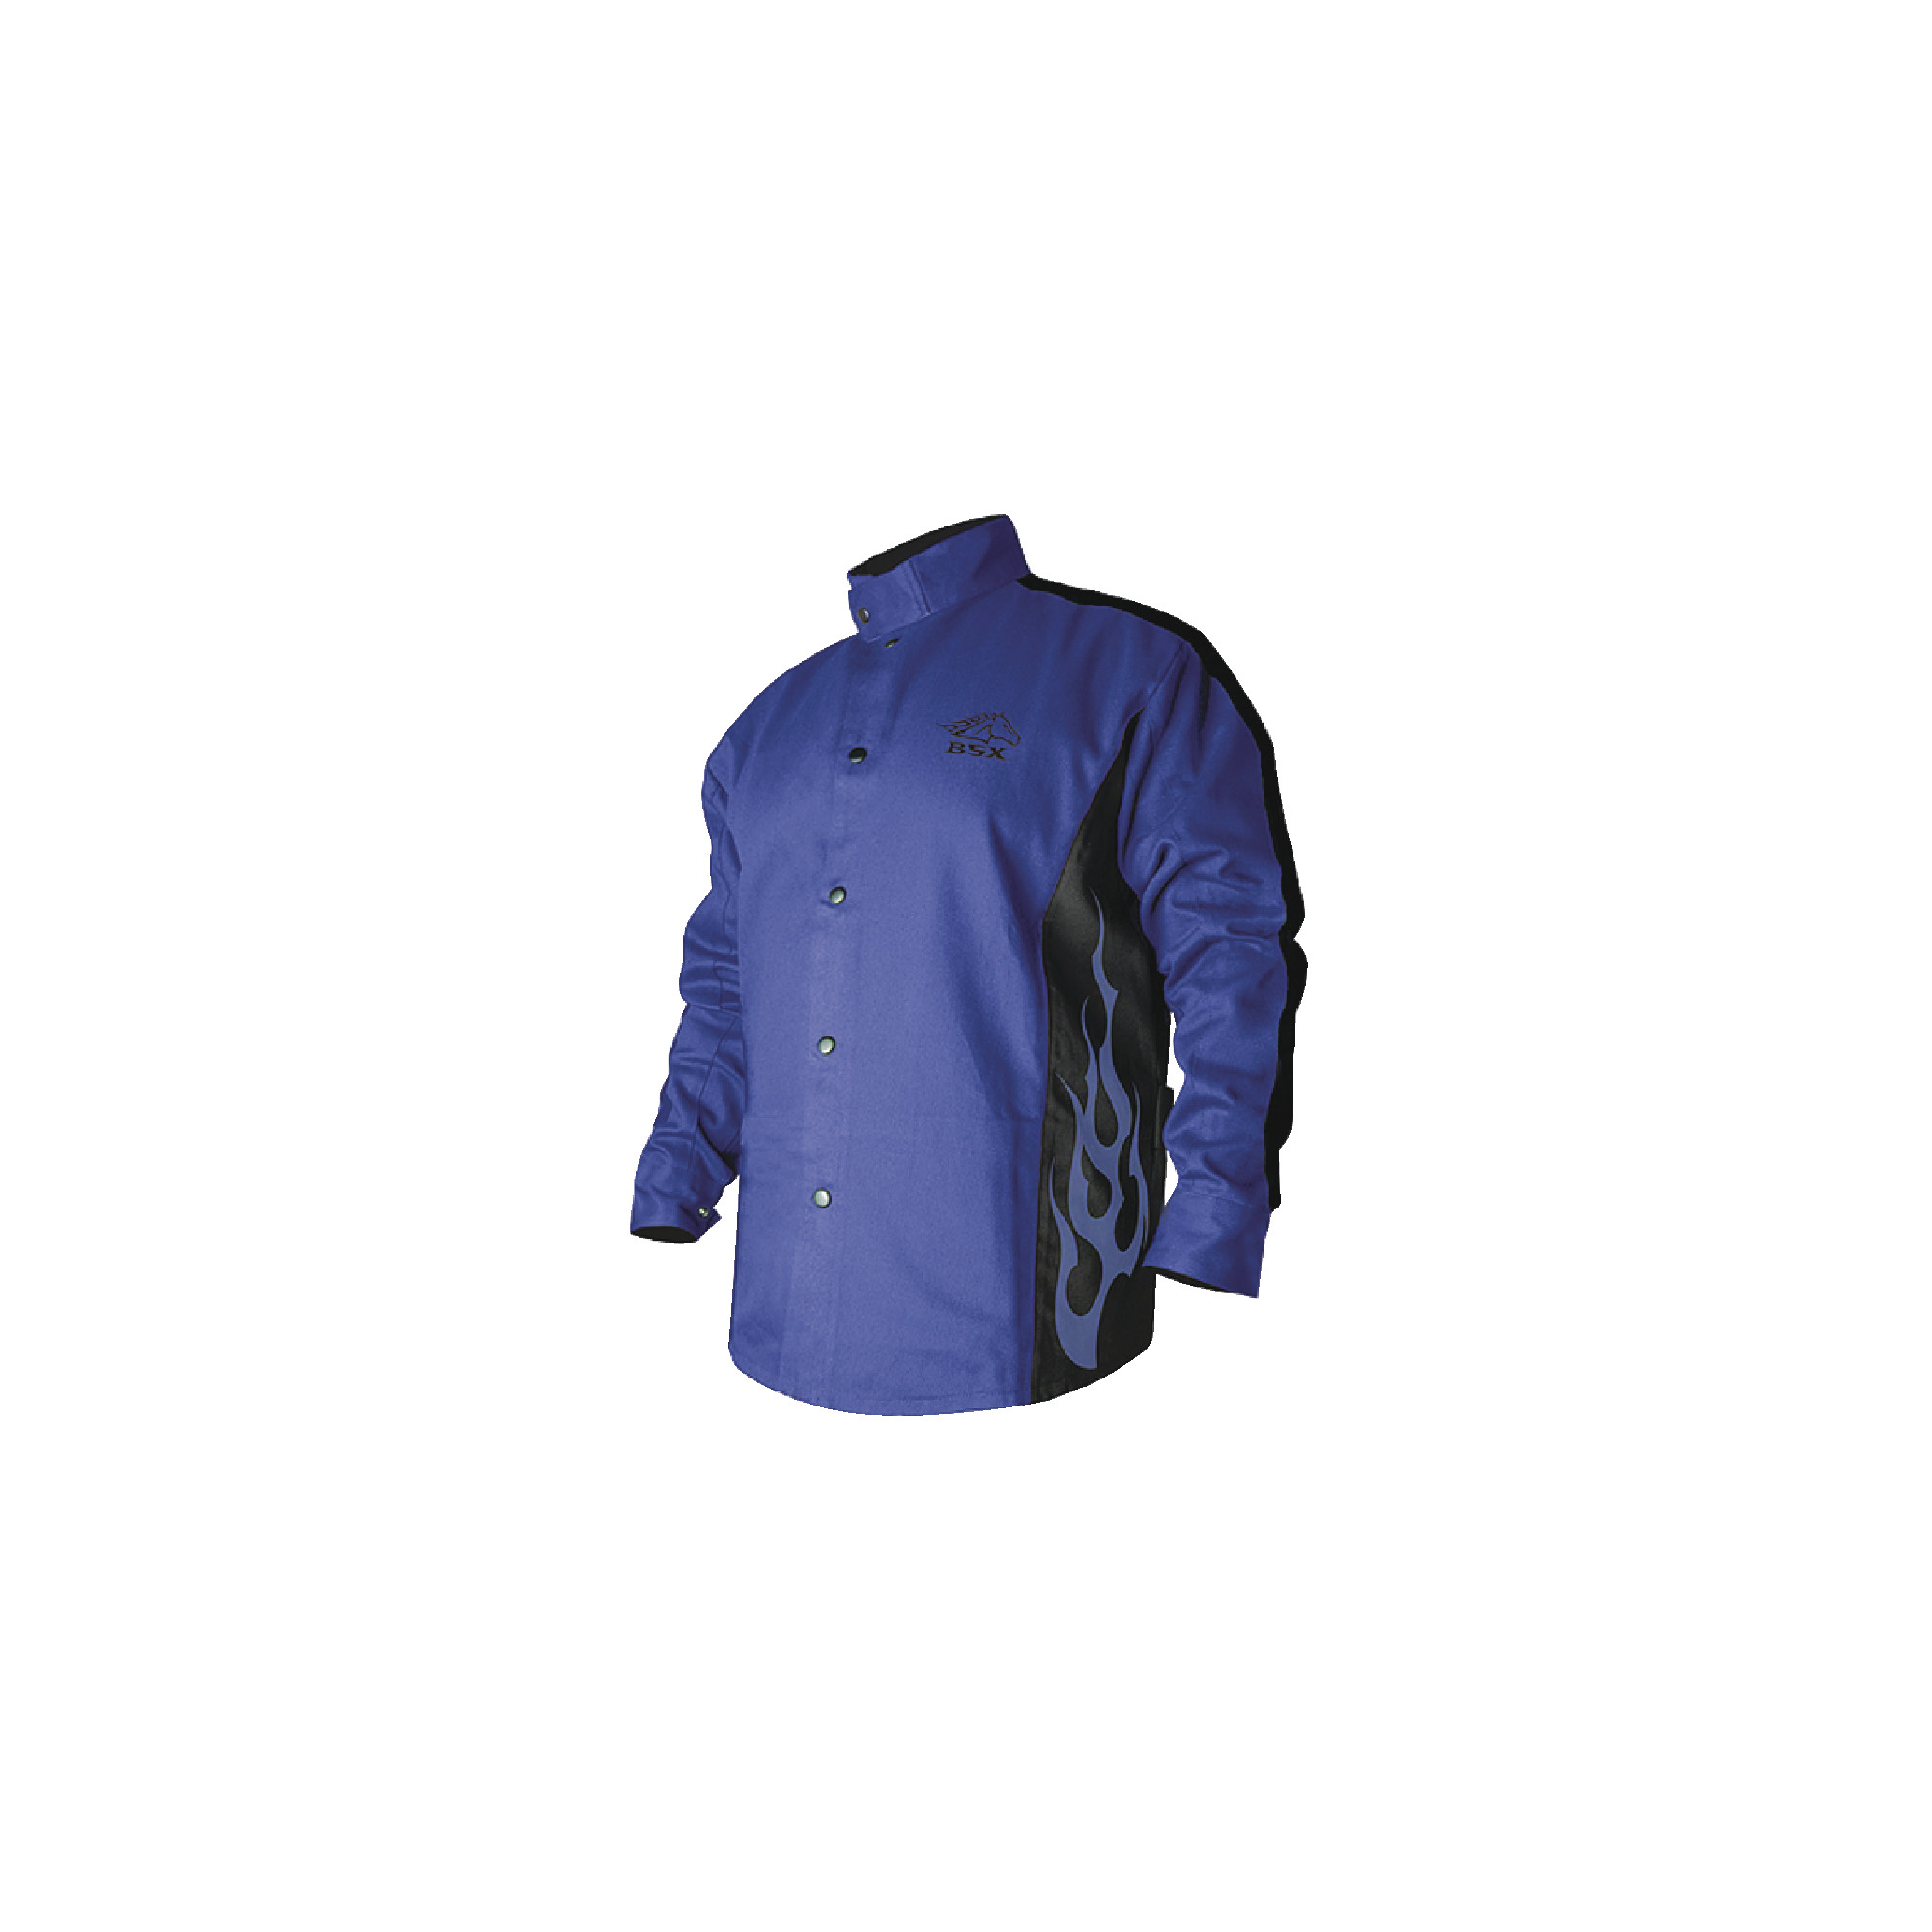 BSX Stryker Blue With Blue Flames Fire Resistant Welding Jacket - Size L